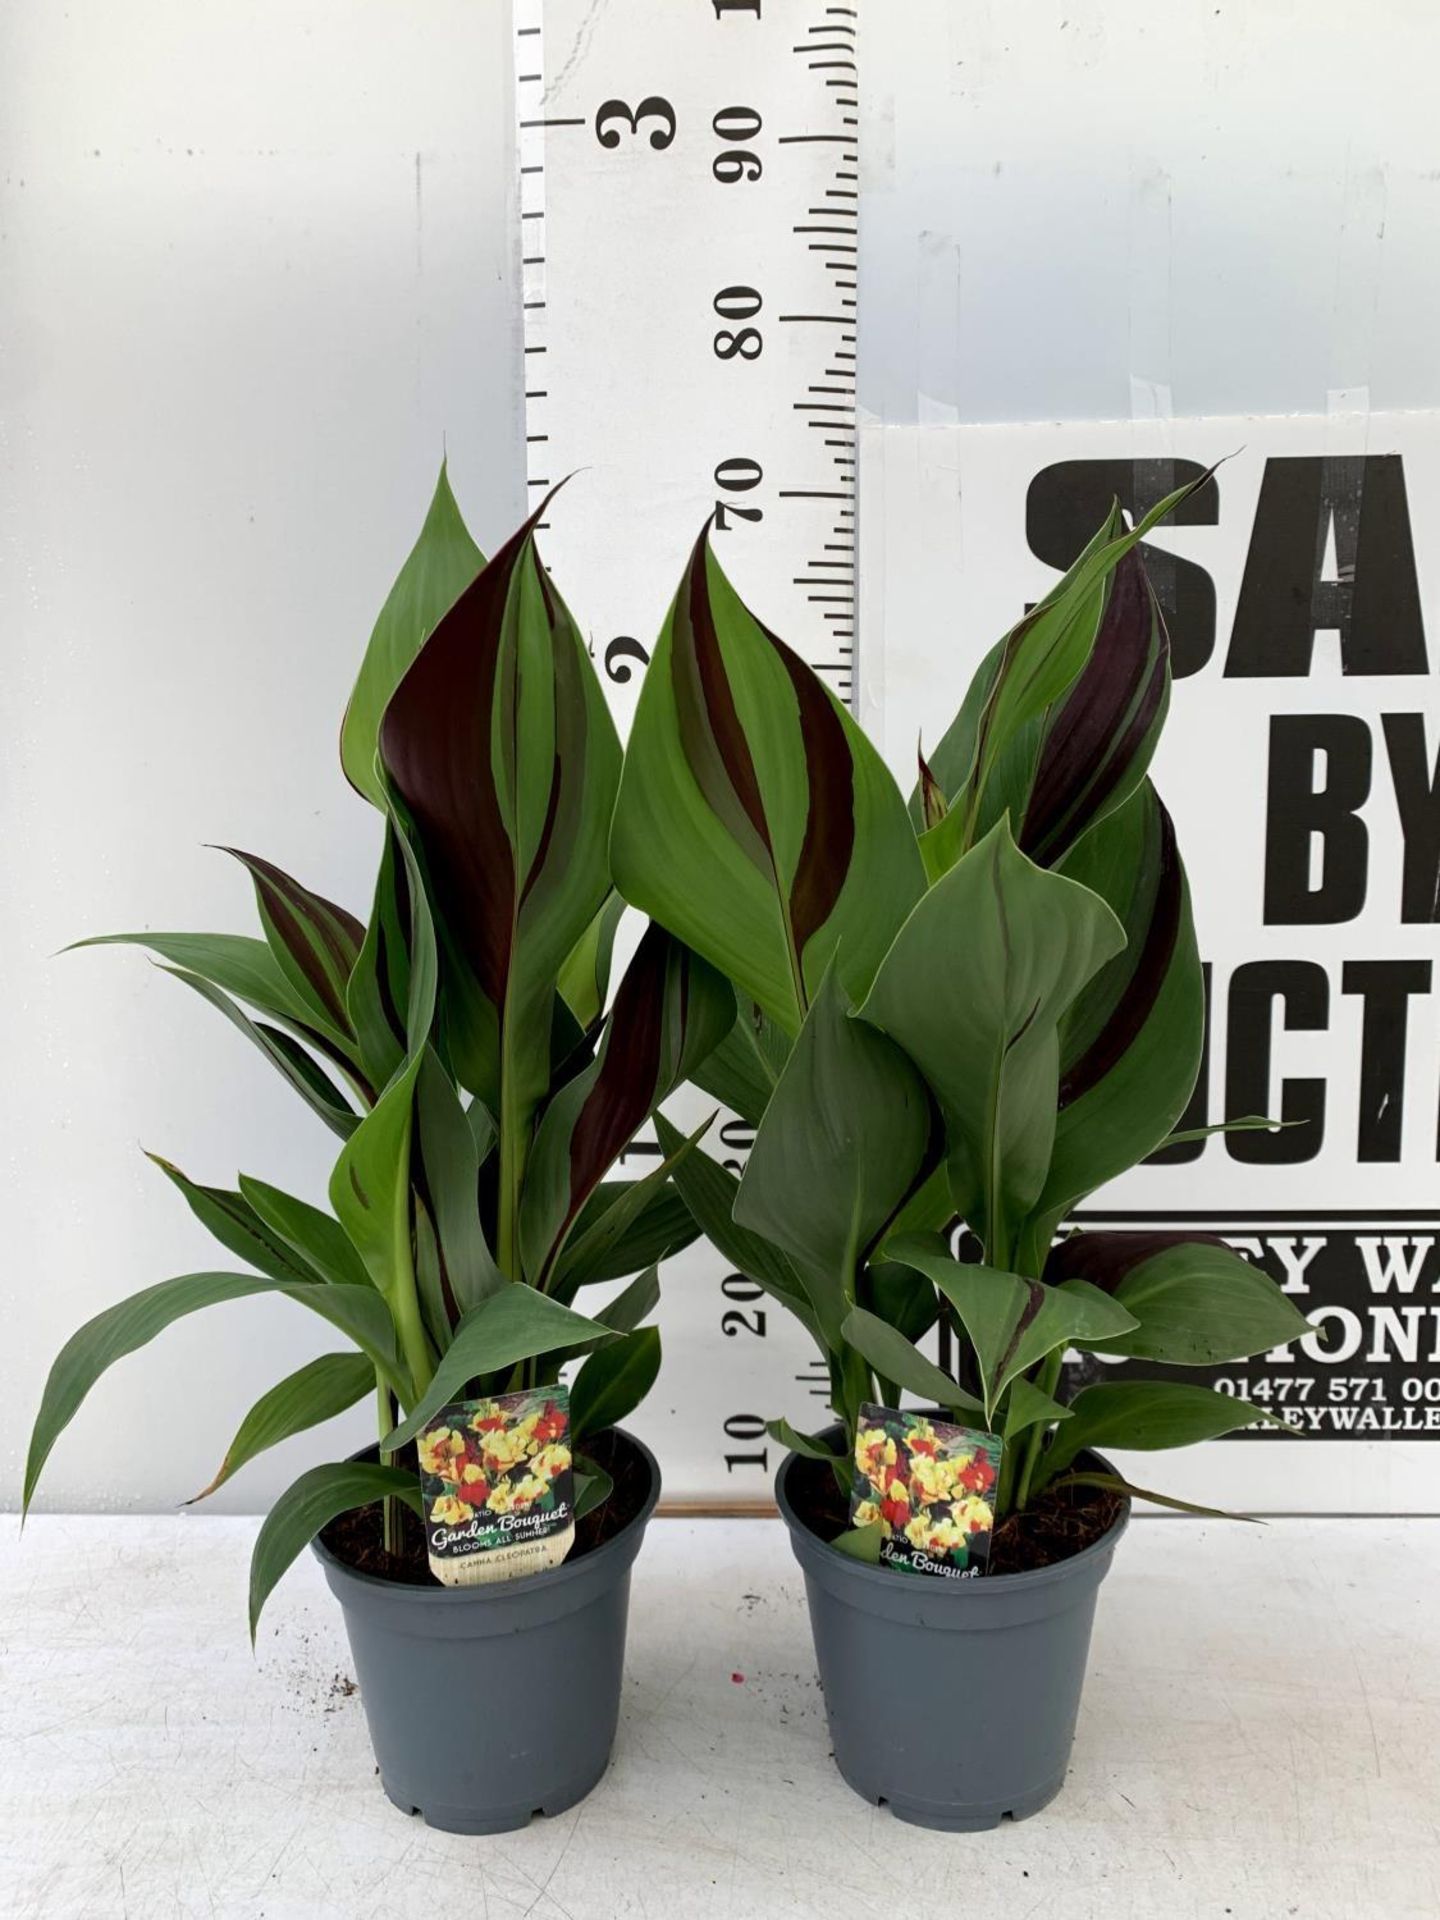 TWO EXCLUSIVE VARIETY CANNA CLEOPATRA APPROX 70CM IN HEIGHT IN 2 LTR POTS PLUS VAT TO BE SOLD FOR - Image 2 of 6